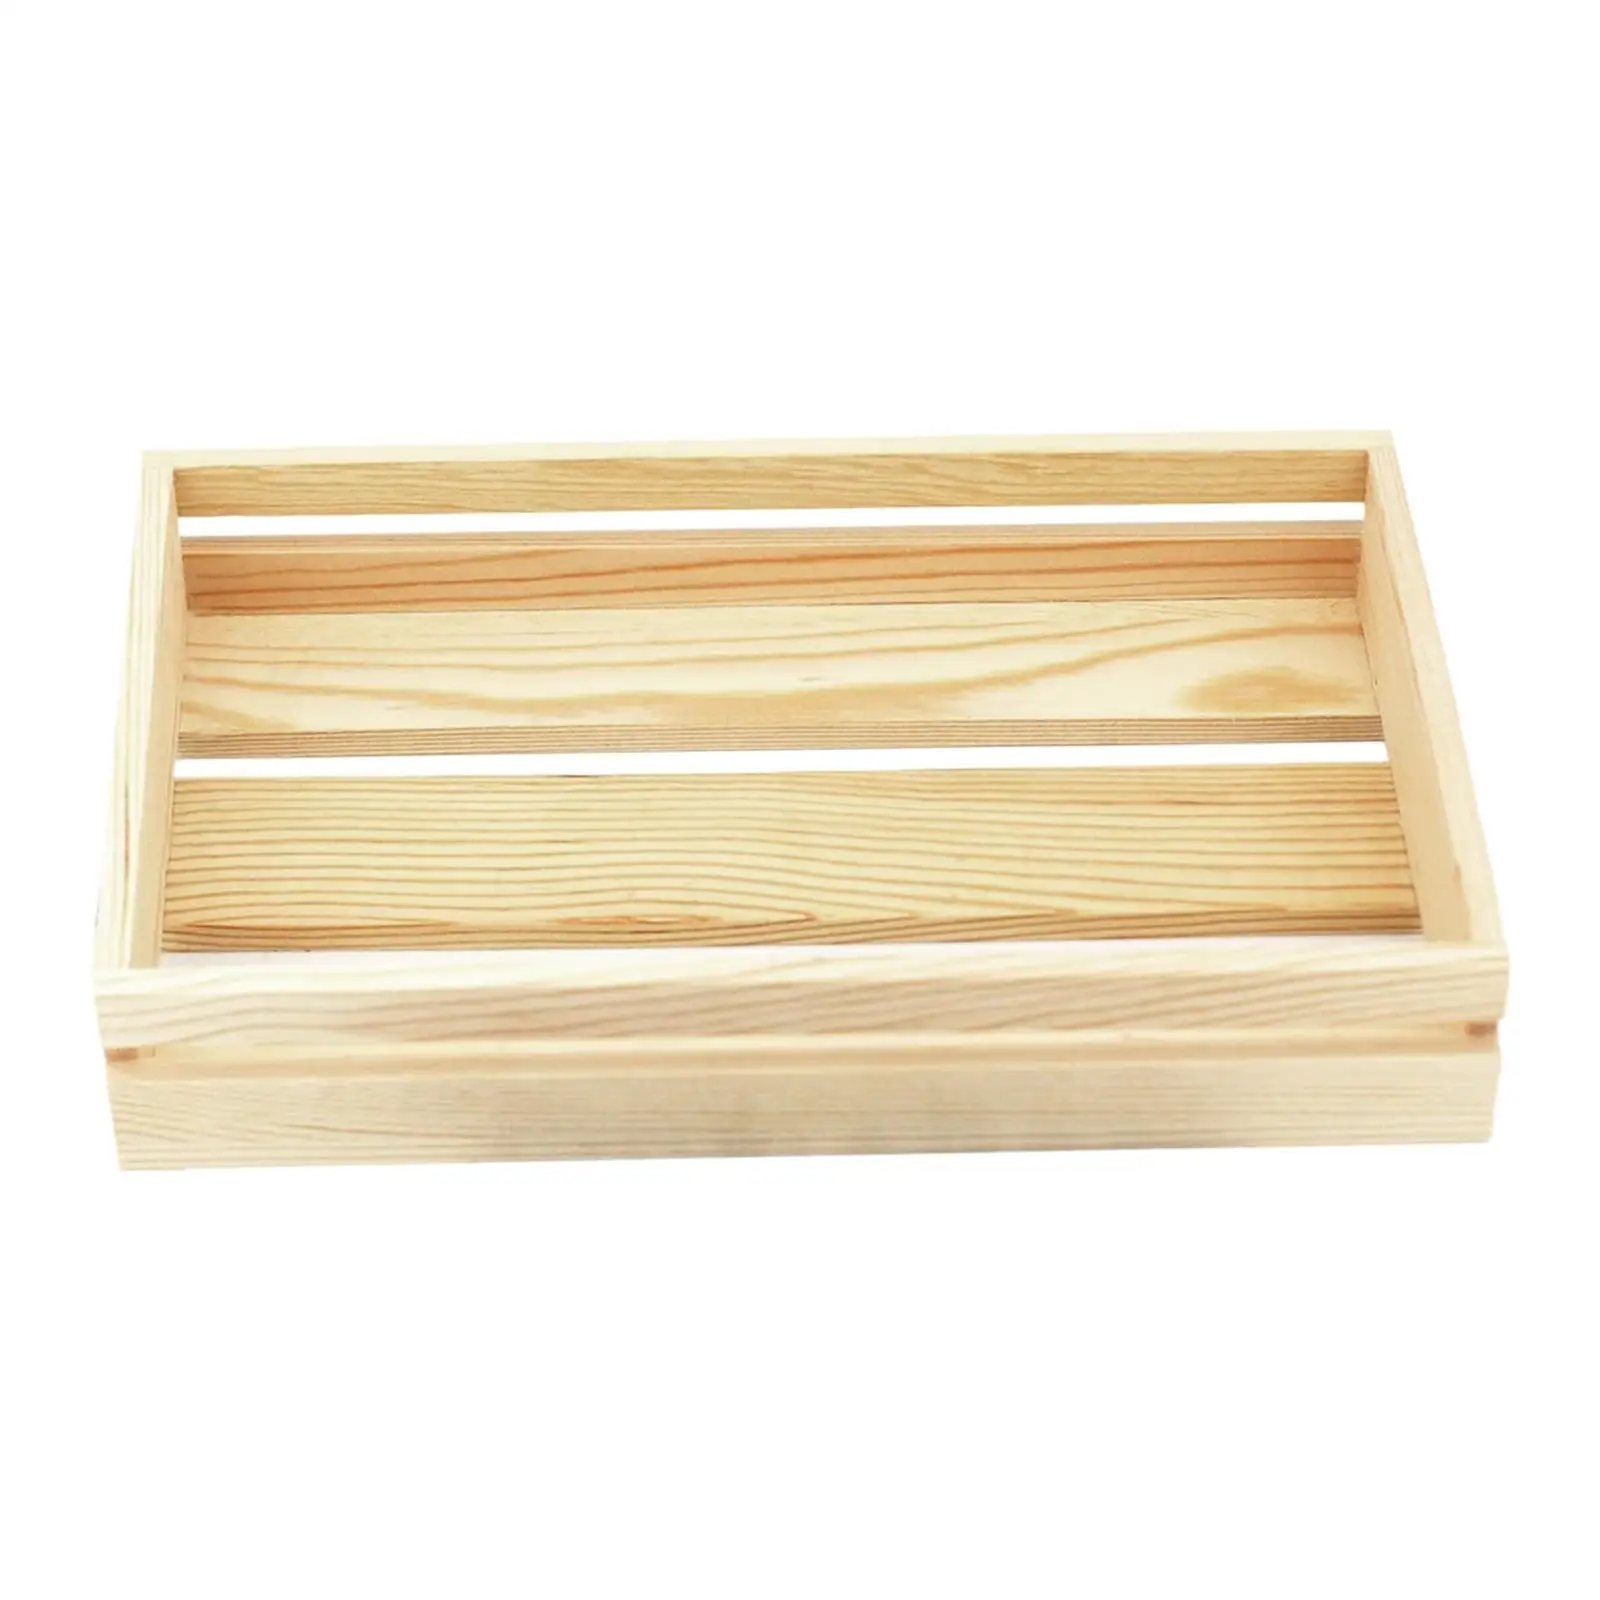 Soap Tray Soap Dish Durable Self Draining Ventilated Wooden Shelf Soap Holder for Shower Bathroom Kitchen Home Decor